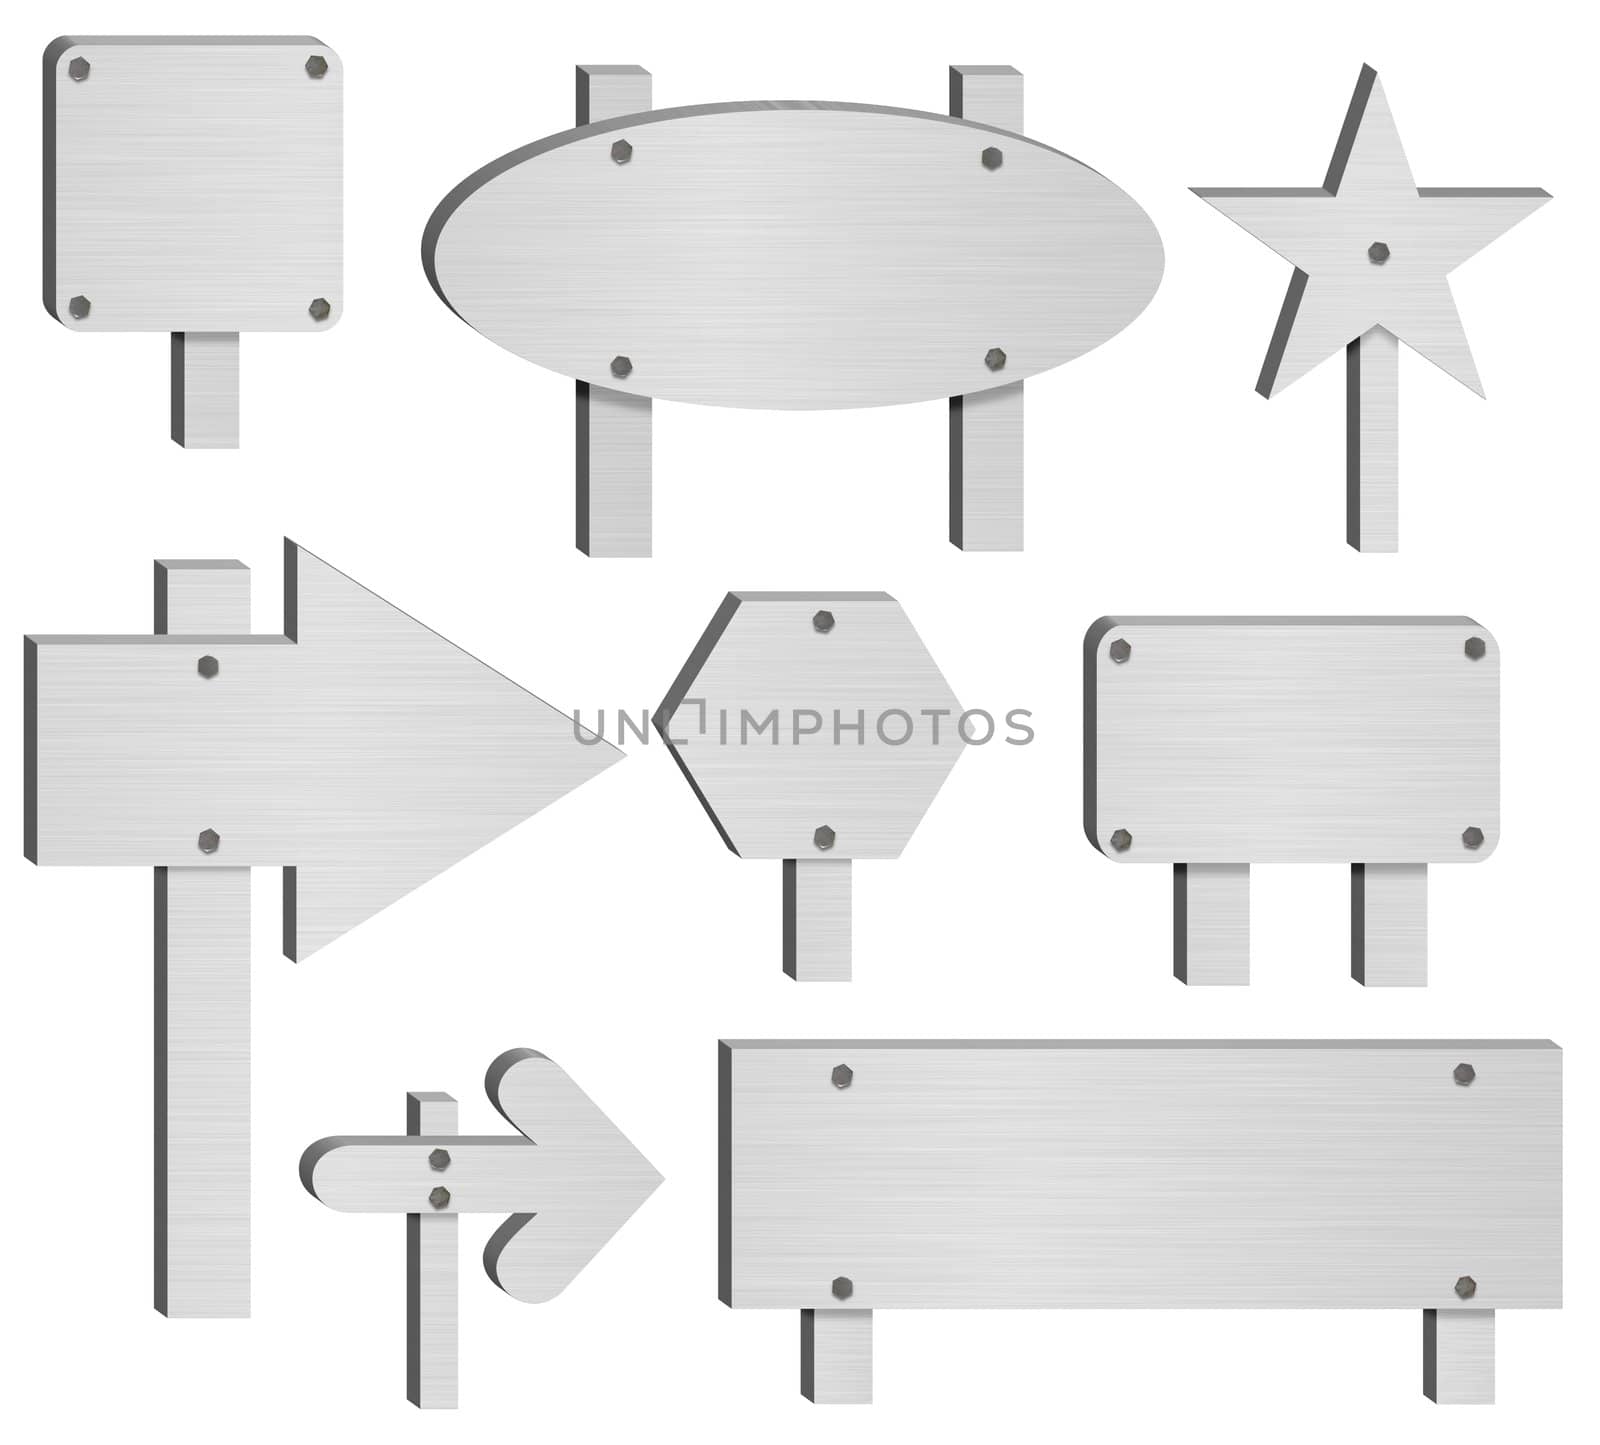 Illustration of eight metal signs